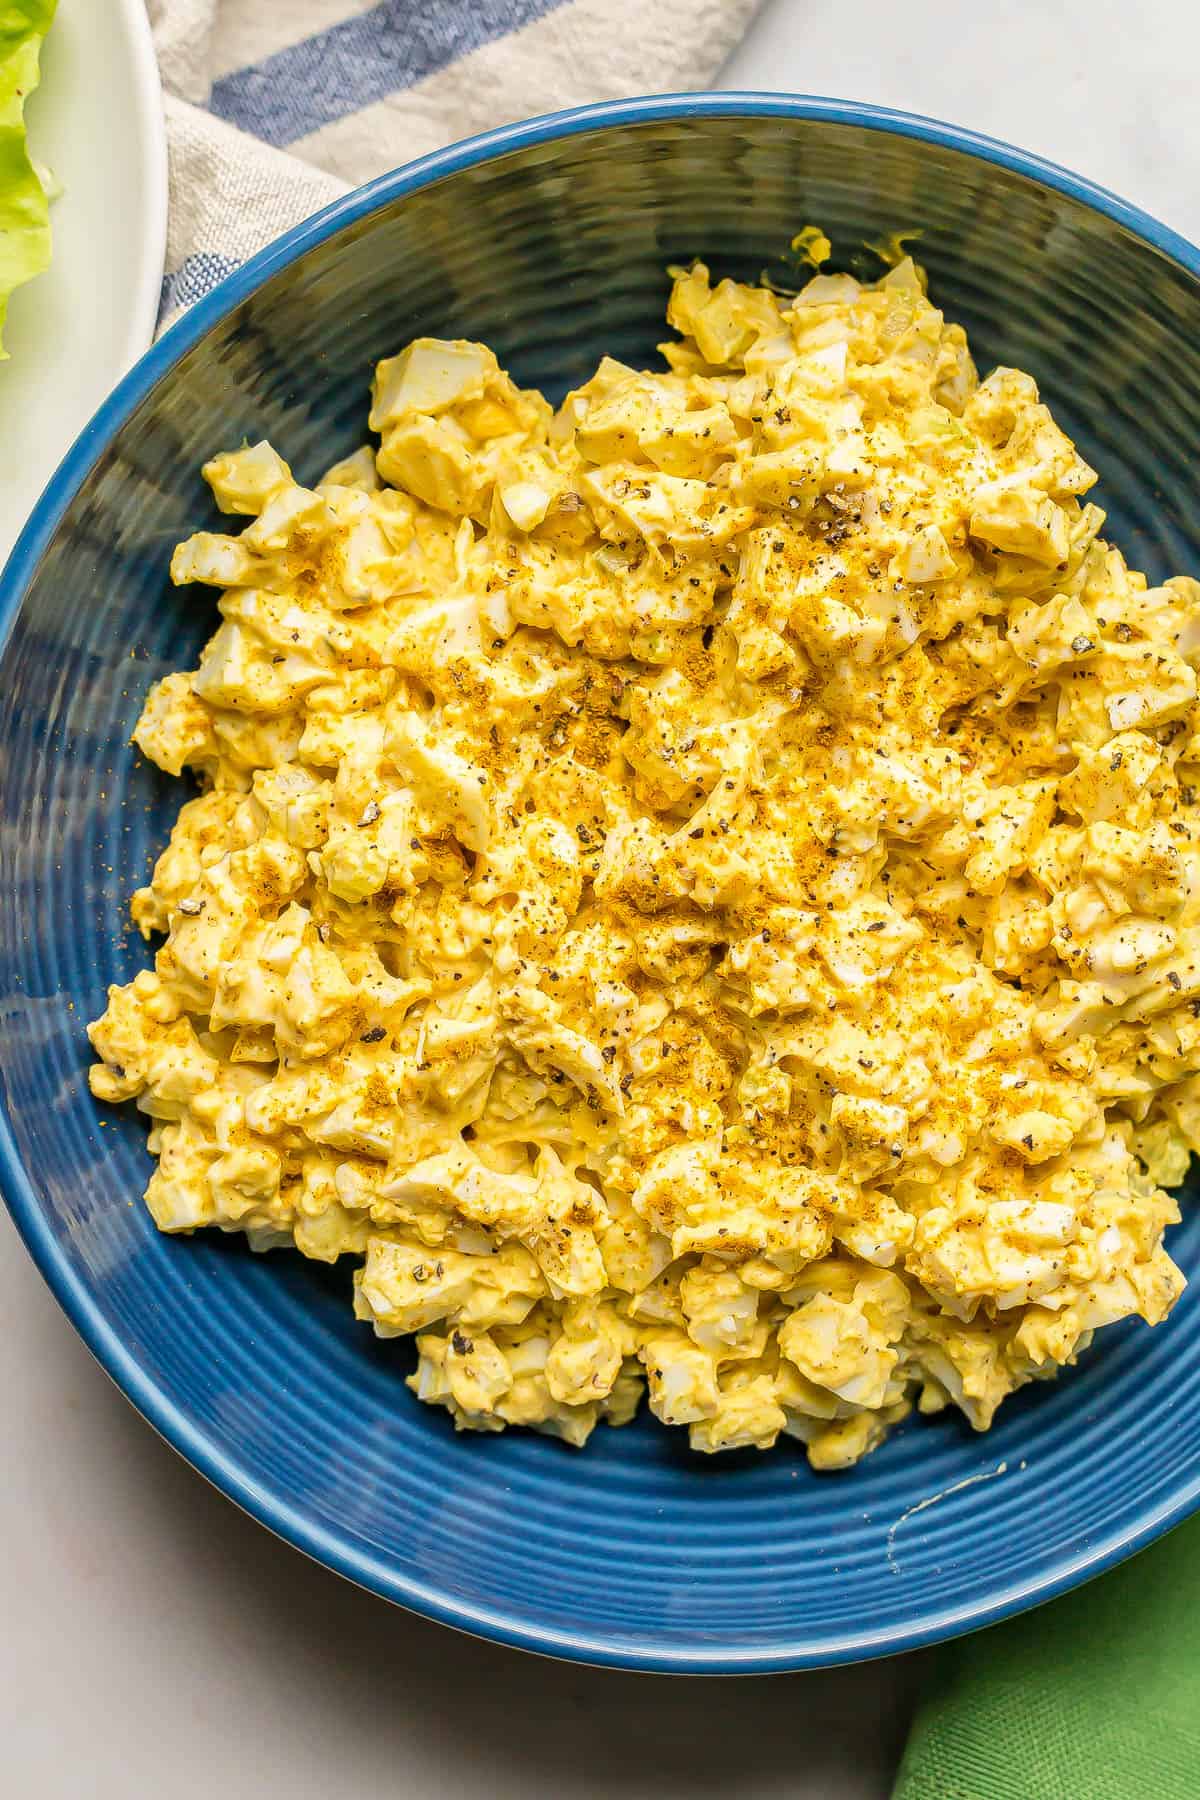 Egg salad with curry powder in a blue bowl.